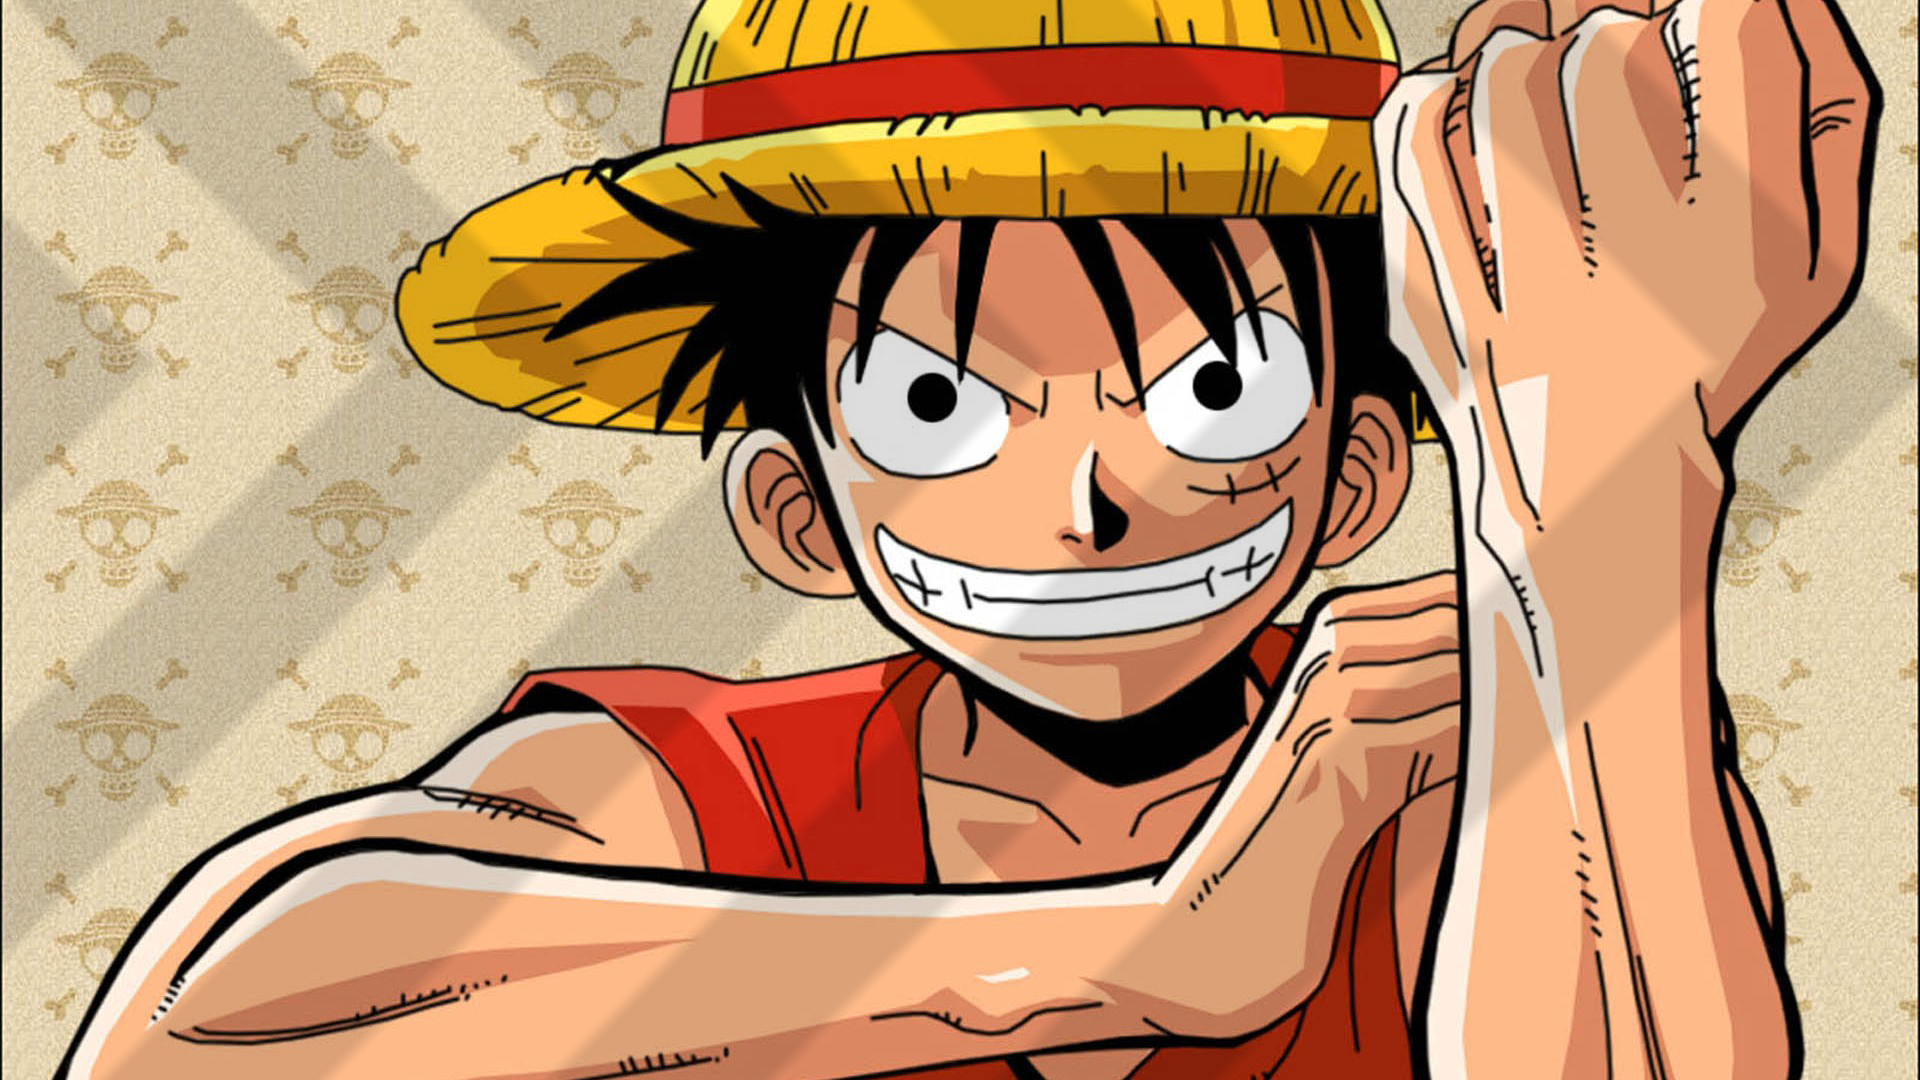 Free Download Download One Piece Luffy Hd Wallpaper Hd Wallpaper 19x1080 For Your Desktop Mobile Tablet Explore 76 One Piece Wallpaper Luffy One Piece Wallpapers One Piece Wallpaper 1366x768